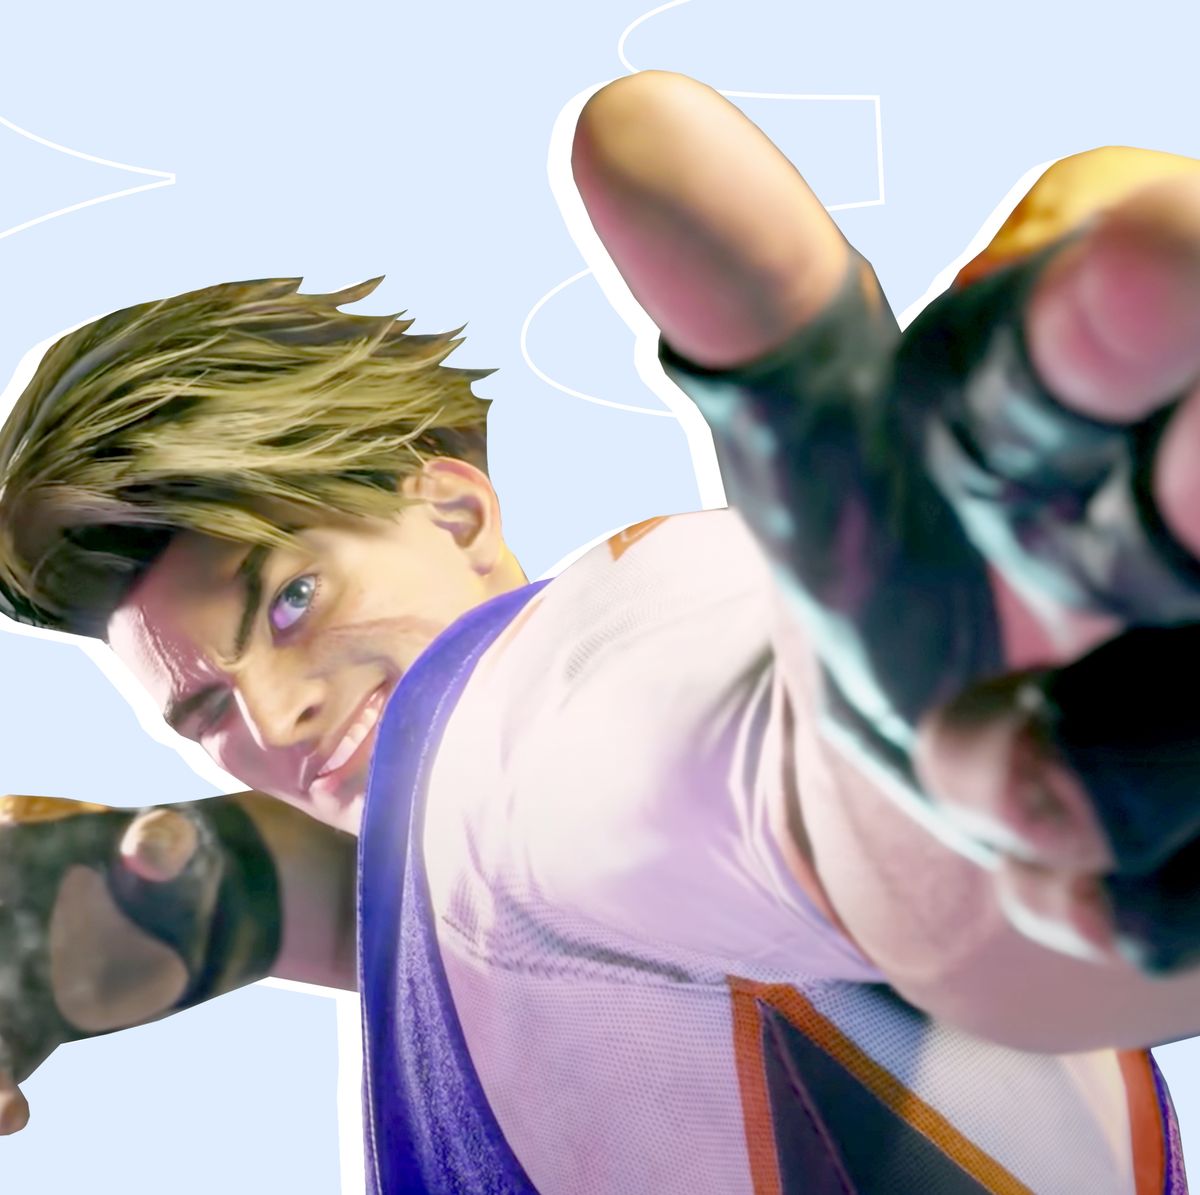 15 Character Revelations We Learned In Street Fighter 6